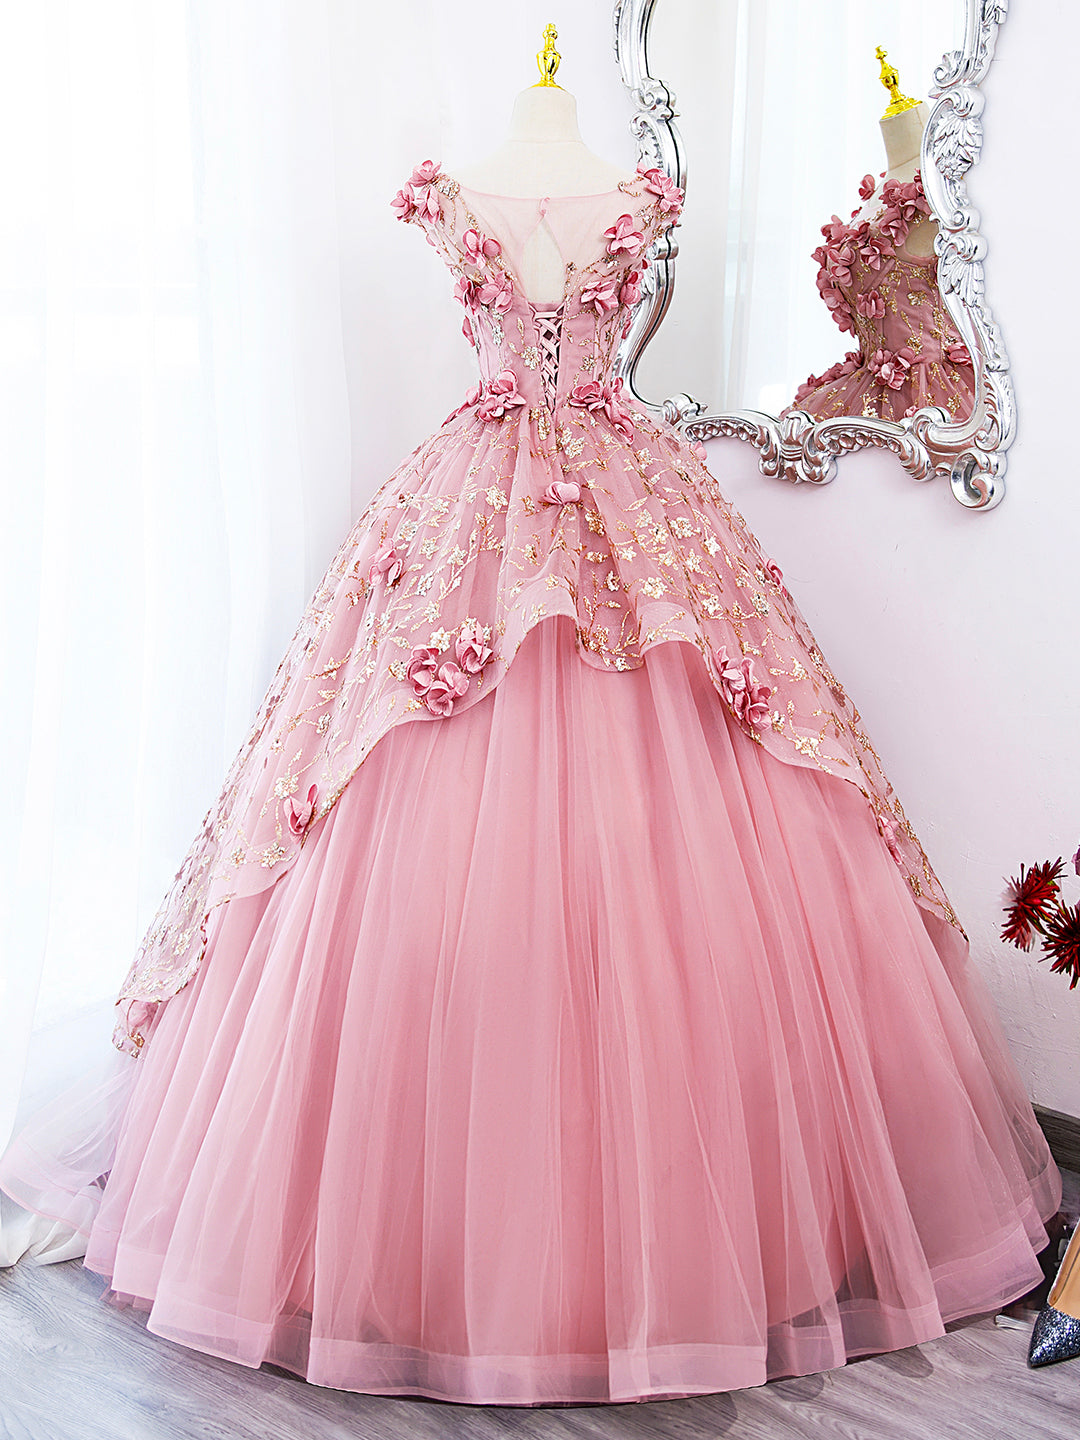 Homecomming Dress Vintage, Pink Tulle Long Prom Dress with Flowers, Beautiful A-Line Sweet 16 Dress